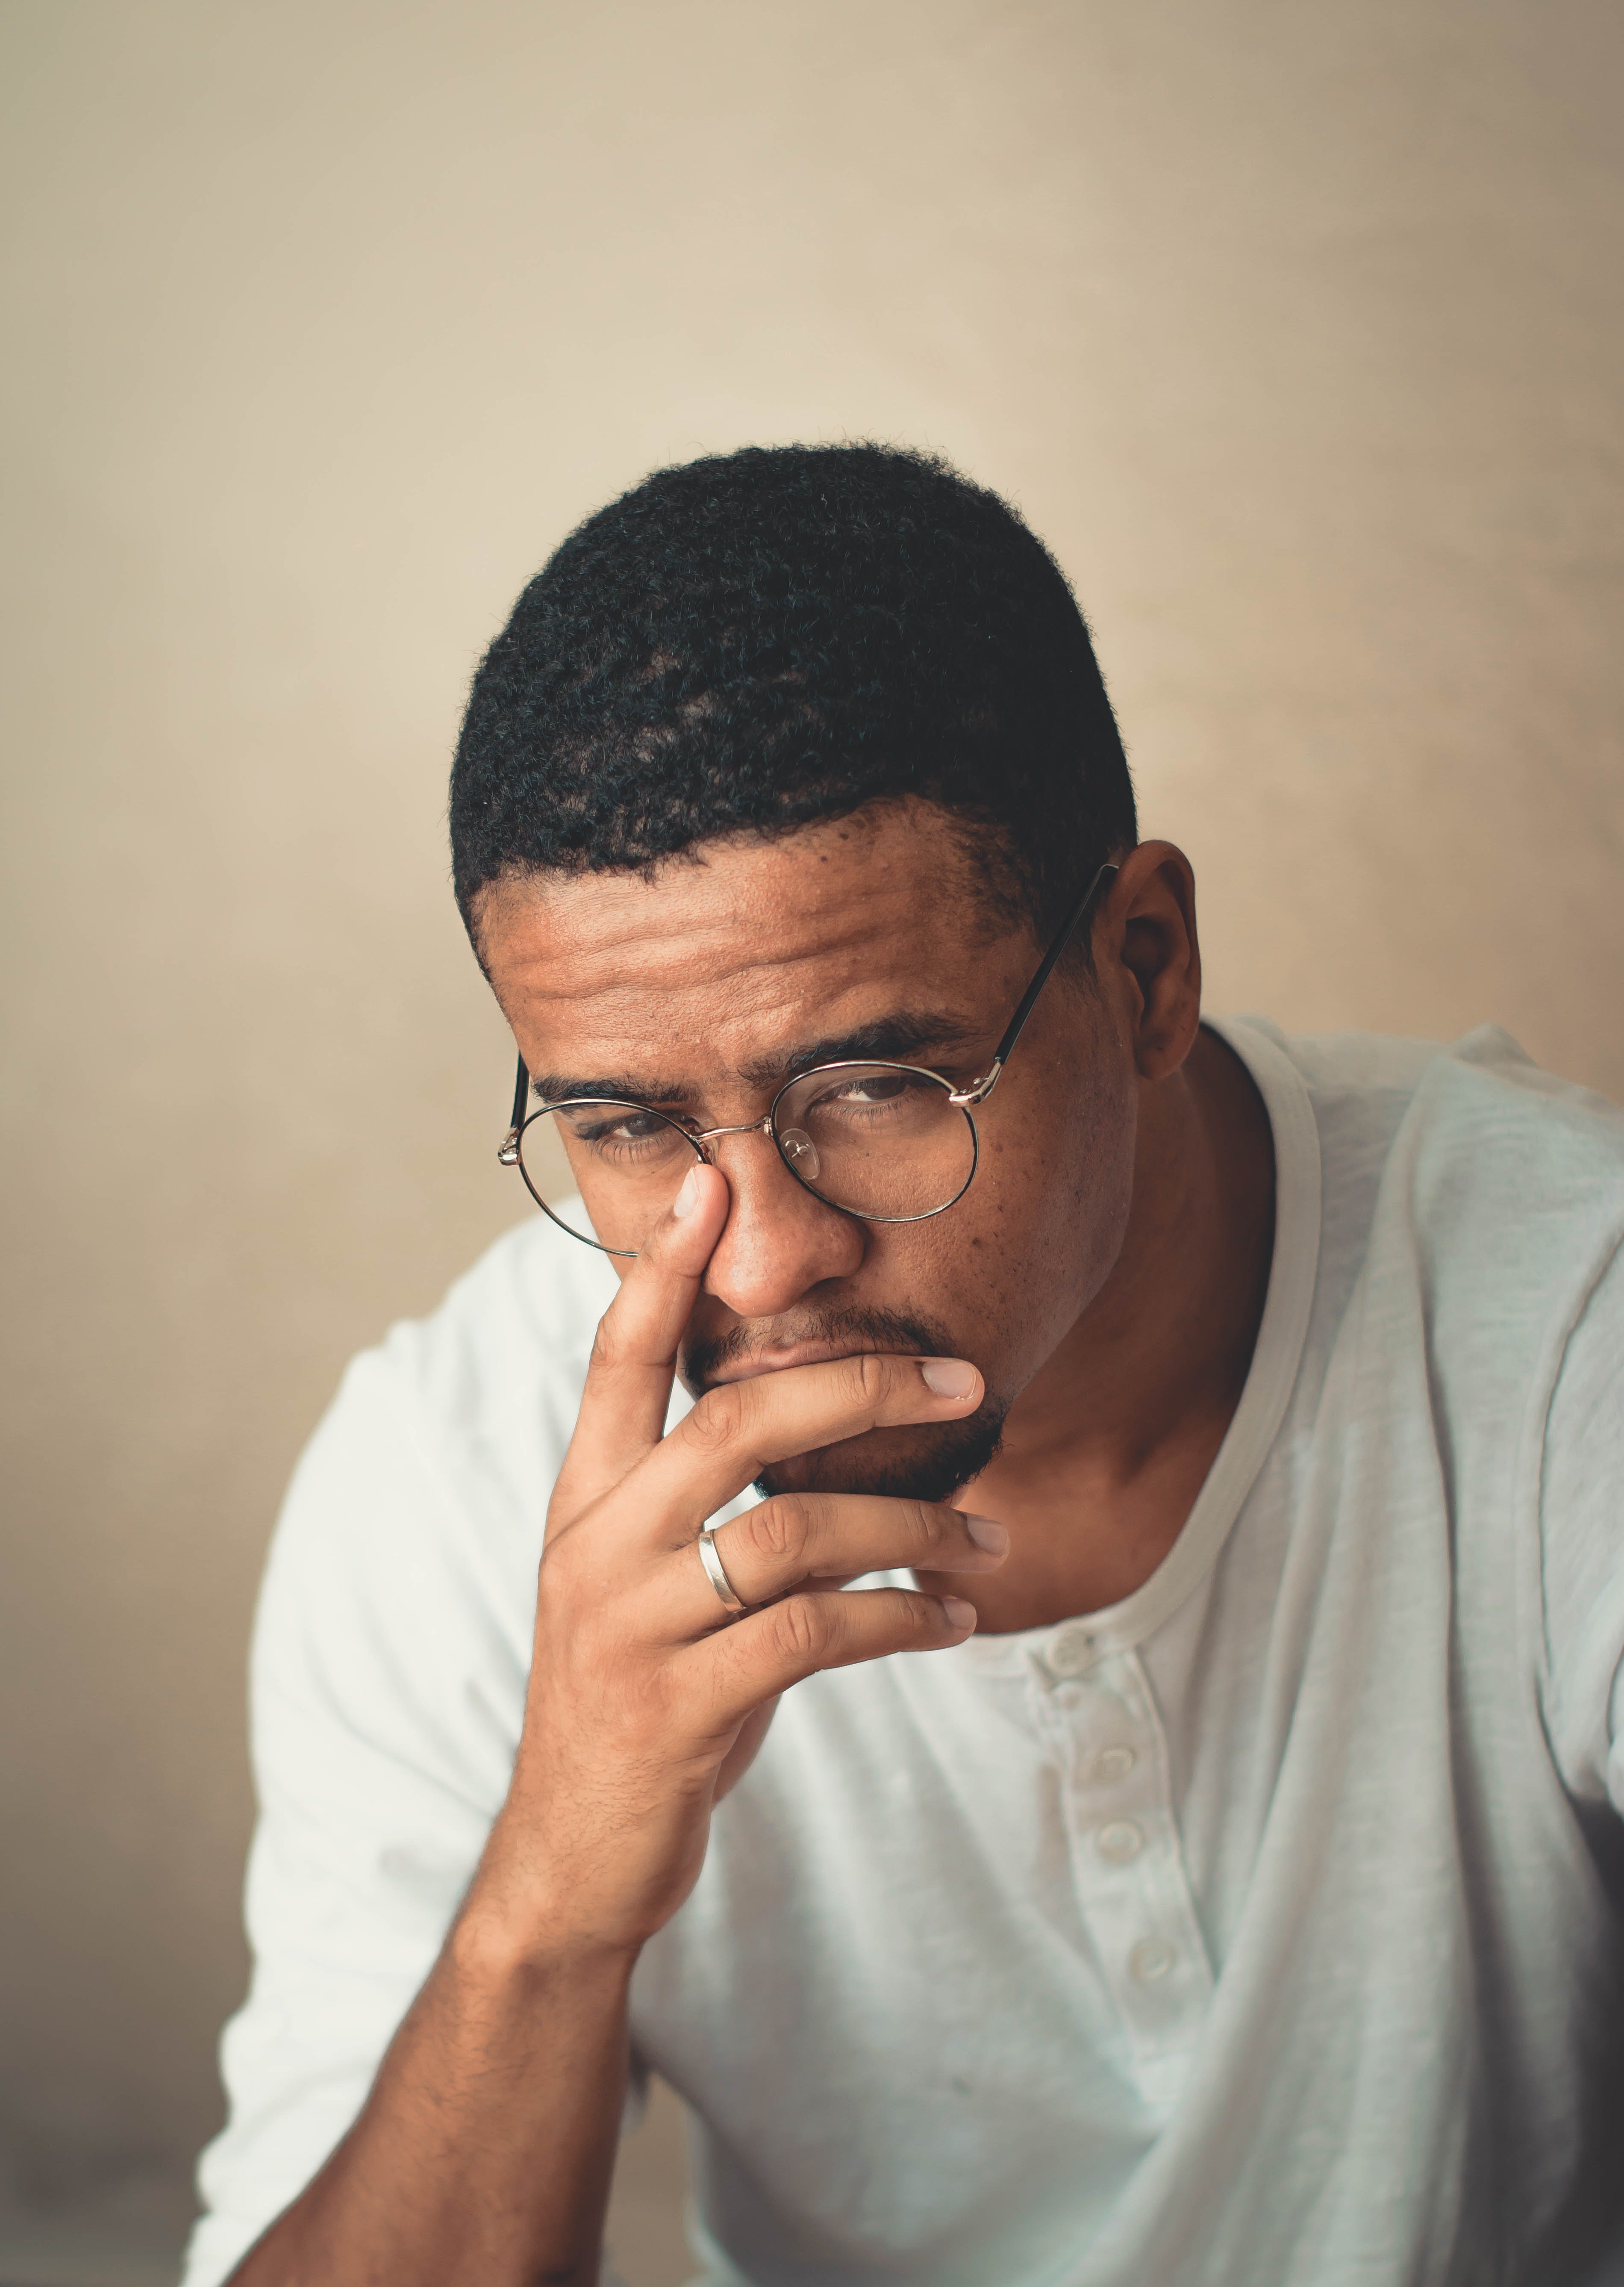 The image of a worried man. | Source: Pexels